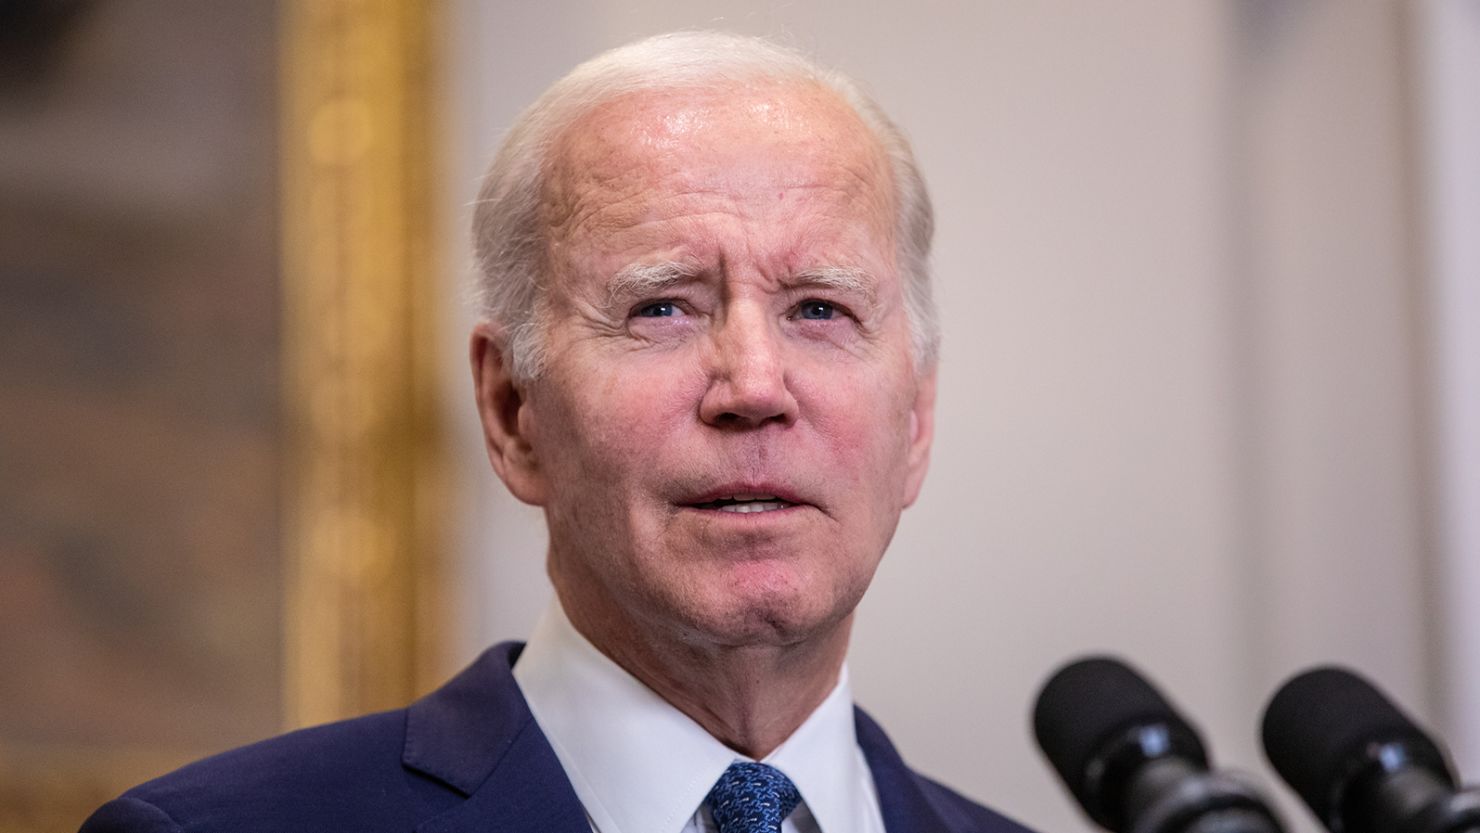 U.S. President Joe Biden delivers remarks on a deal struck with House Speaker Kevin McCarthy to raise the national debt limit in the Roosevelt Room of the White House on May 28, 2023 in Washington, DC.